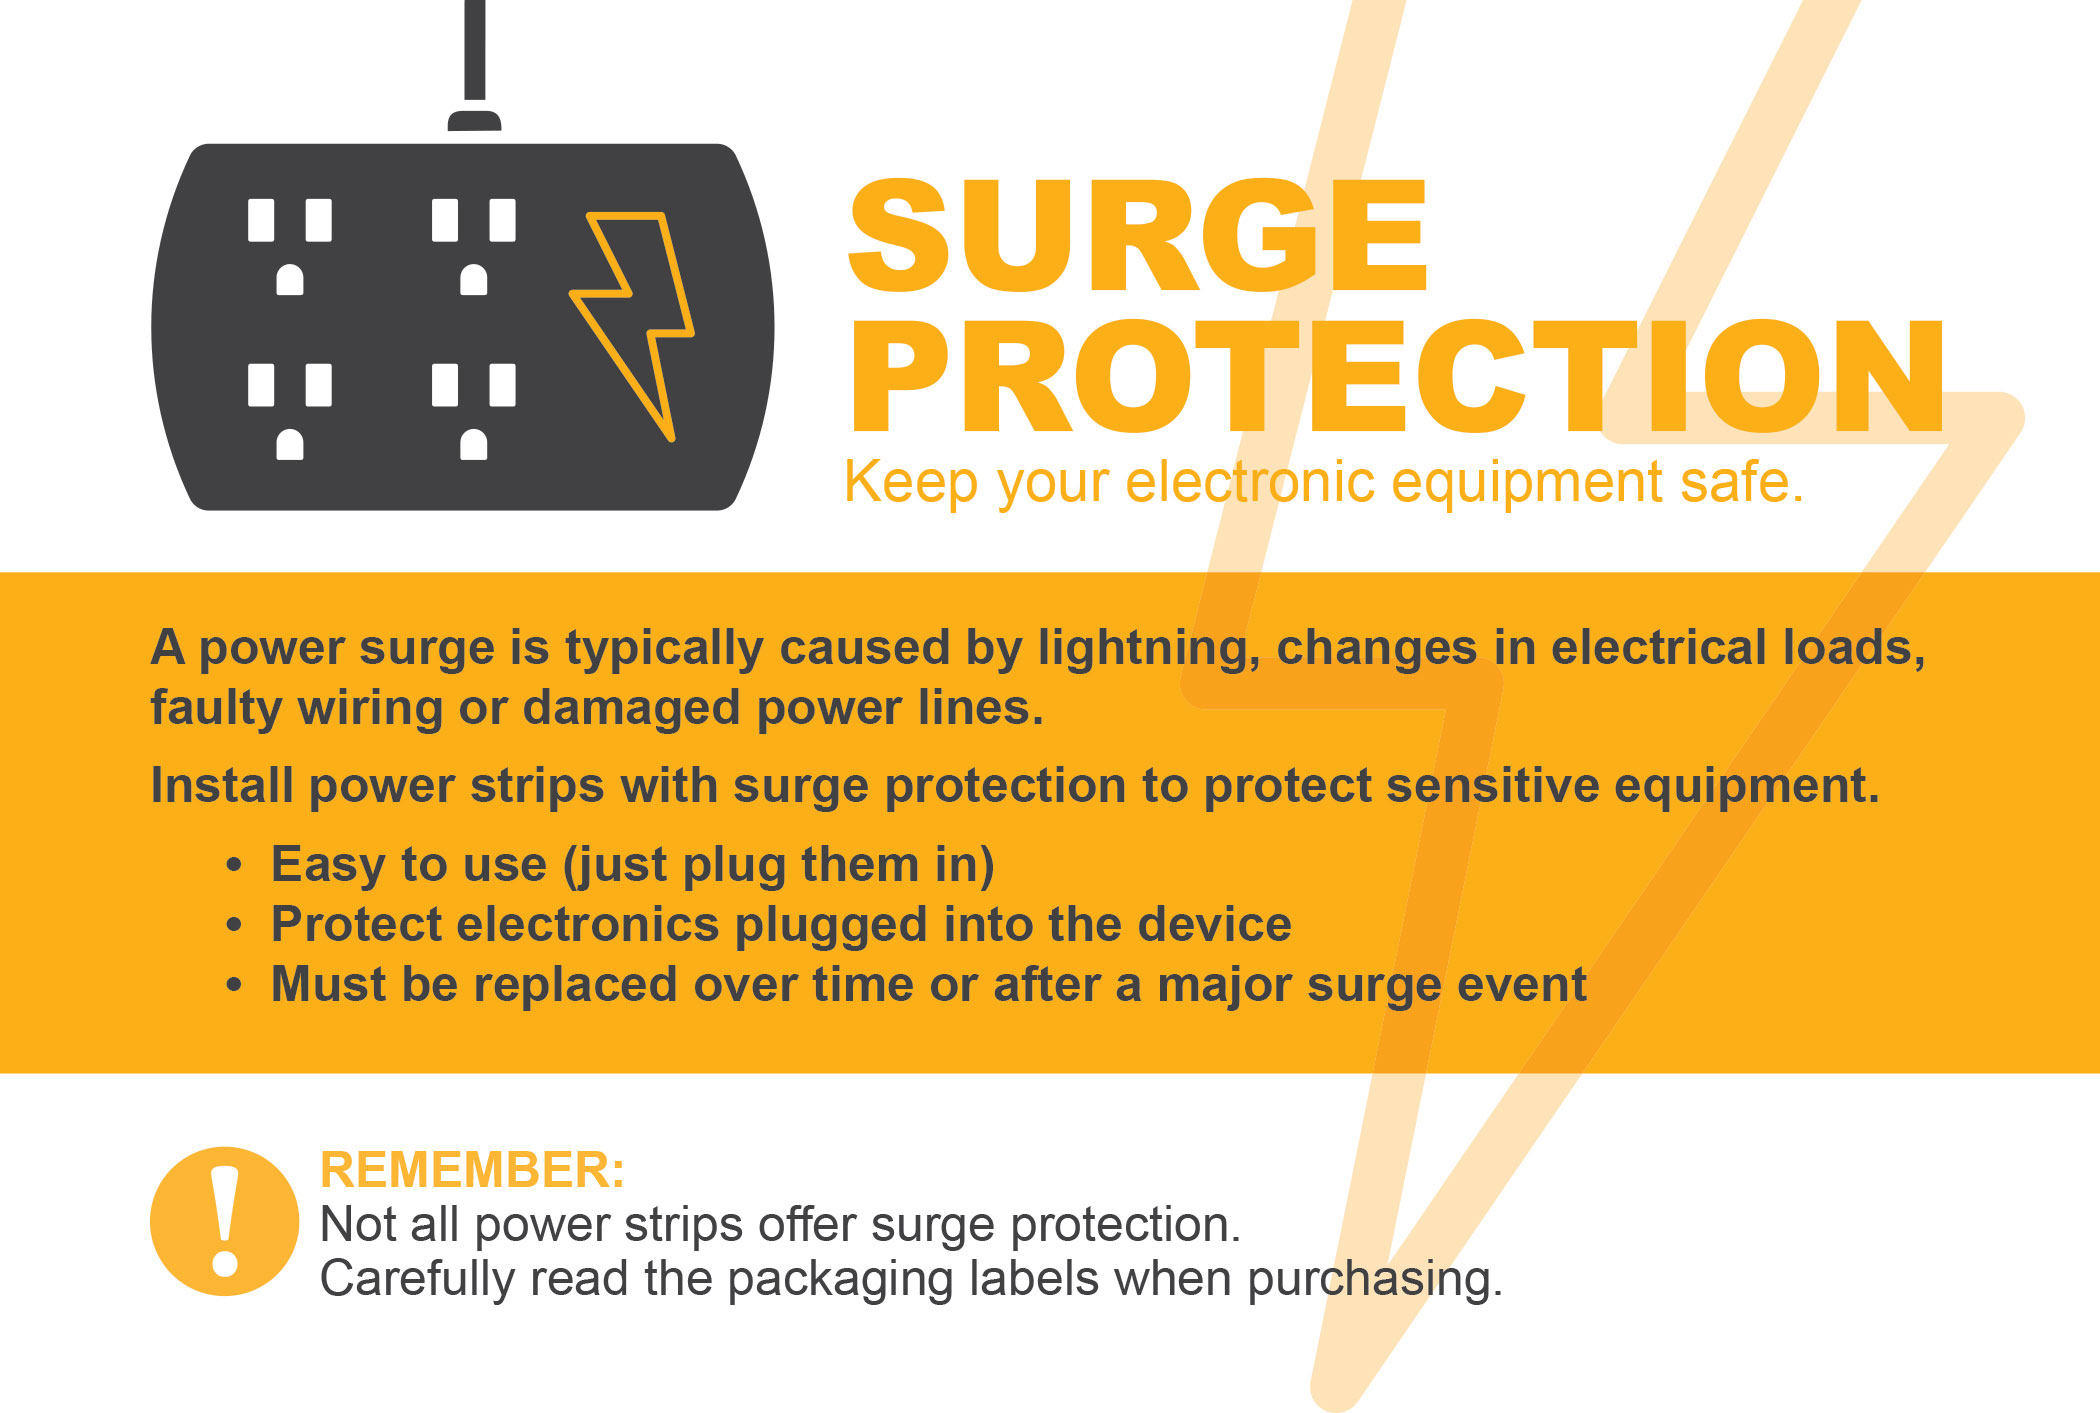 Image with text about surge protection safety.